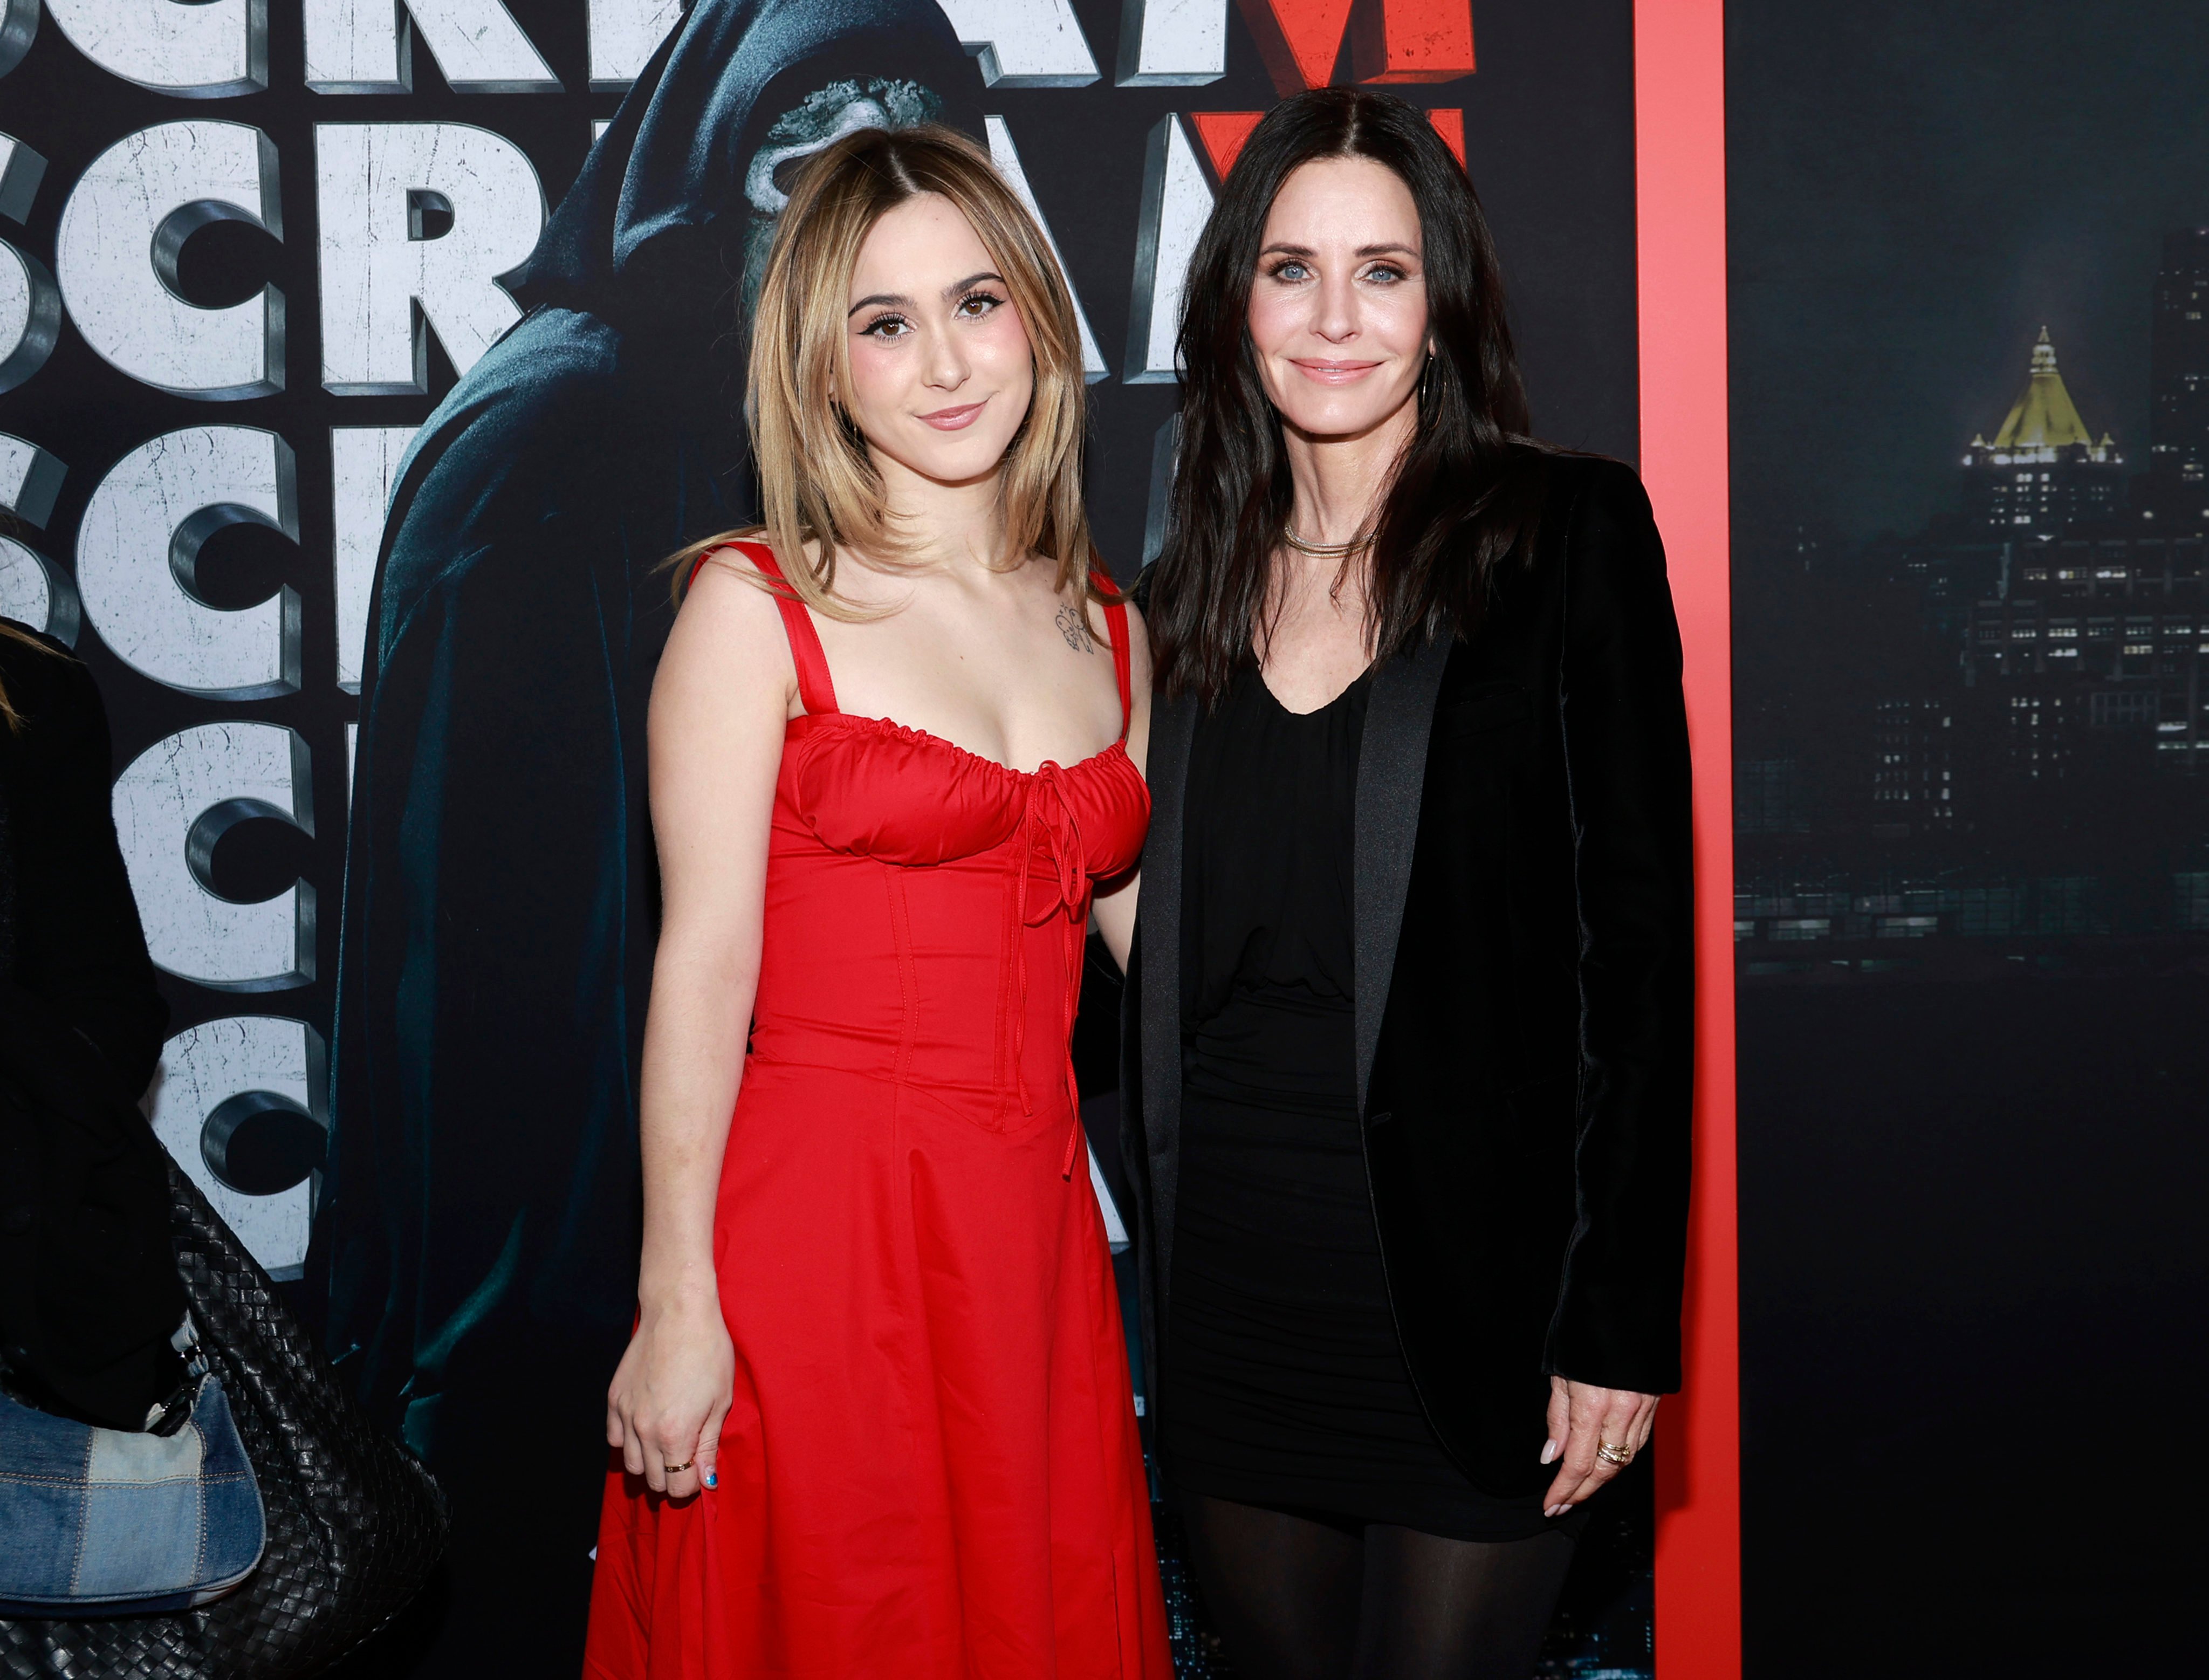 Coco Arquette and Courteney Cox attend the Global Premiere of Paramount Pictures and Spyglass Media Group’s “Scream VI” at AMC Lincoln Square on March 6, 2023 in New York, New York. (39 kB)